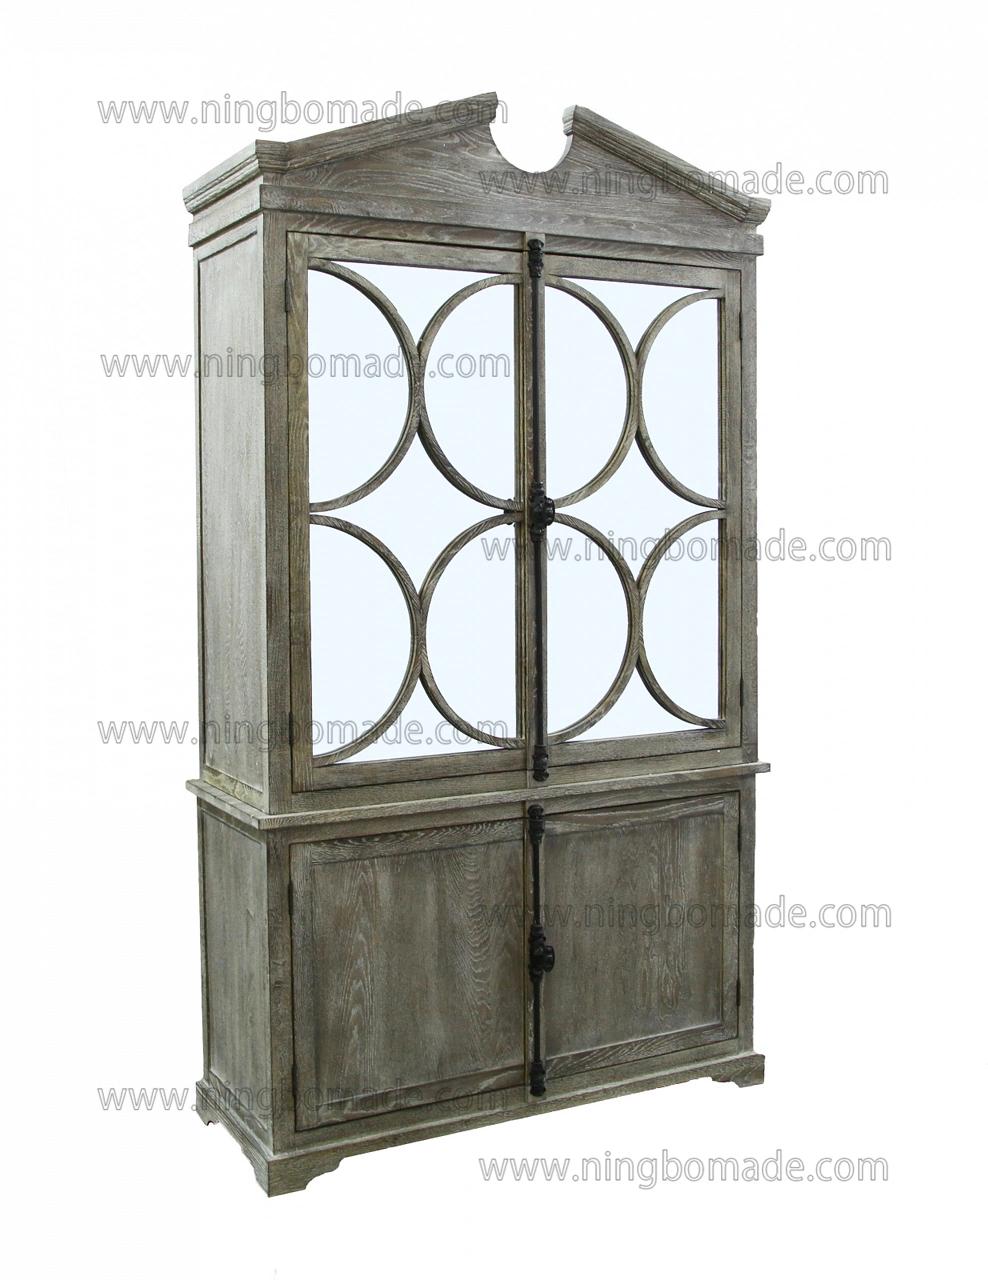 Ningbo Antique Style Country Rustic Classical Vintage Accent Furniture Oak Weather Grey White Display Showcase Cabinet